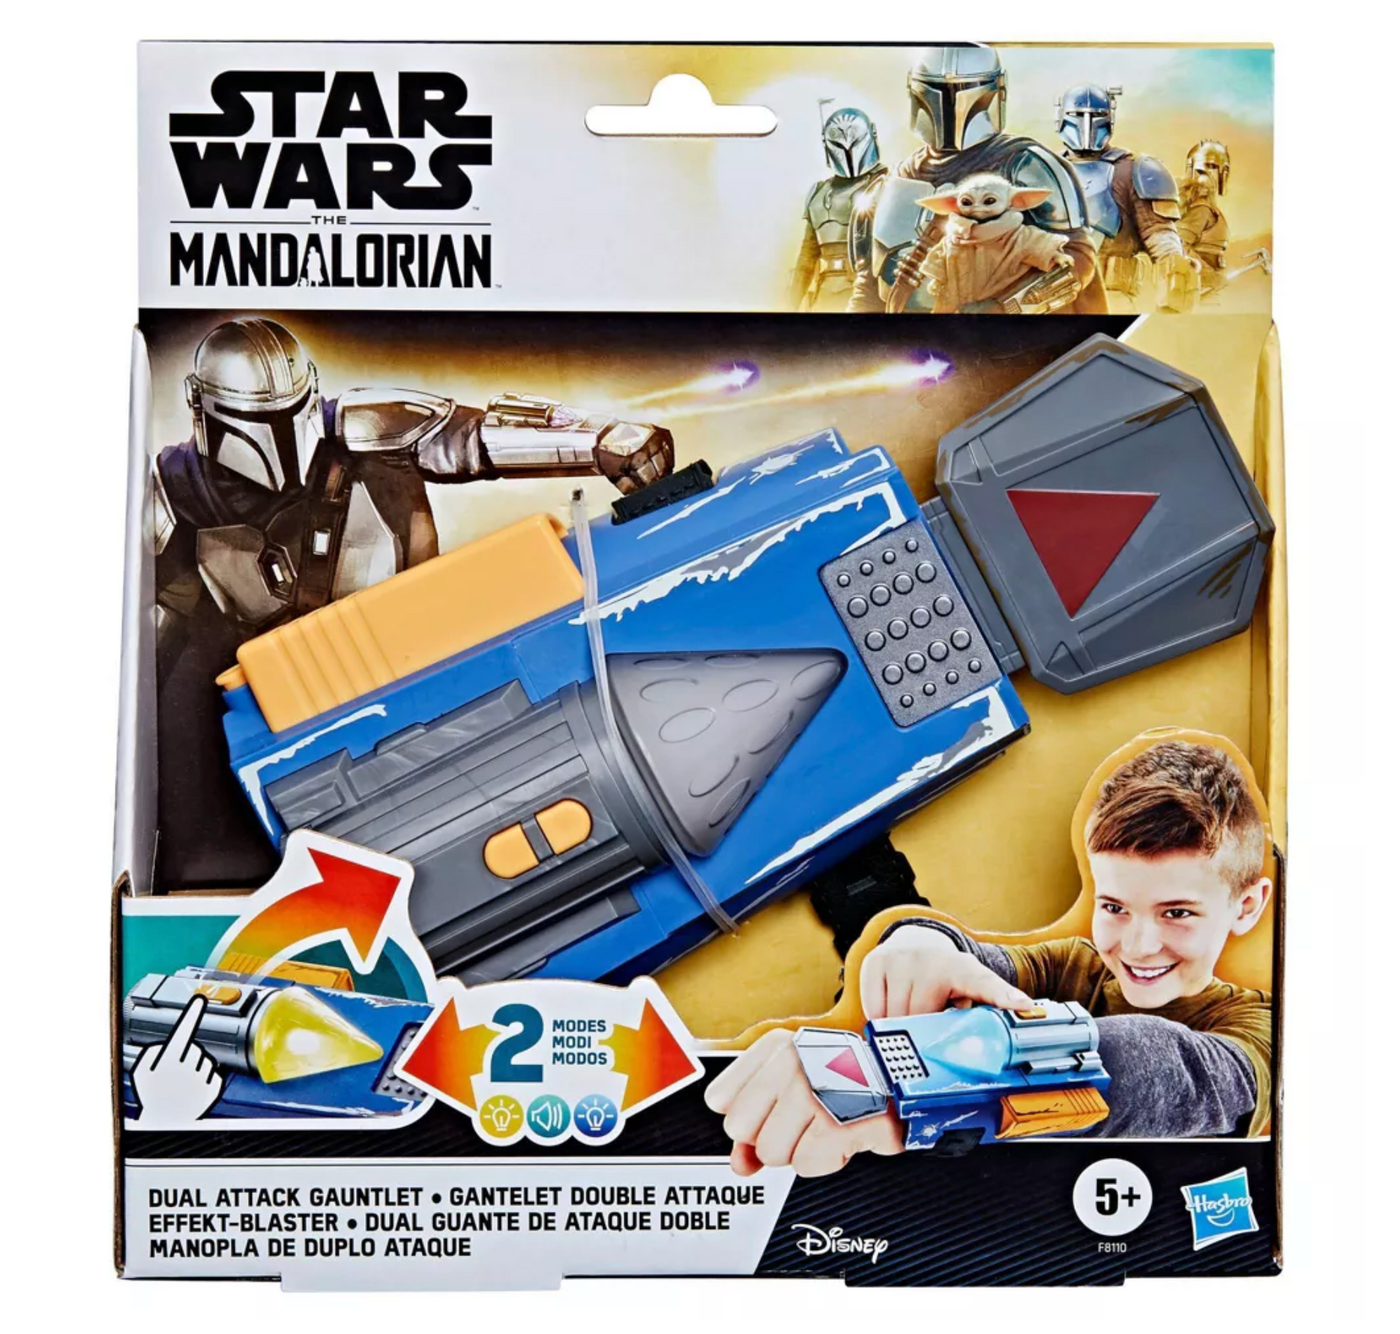 Star Wars The Mandalorian Dual Attack Electronic Gauntlet Toy New with Box